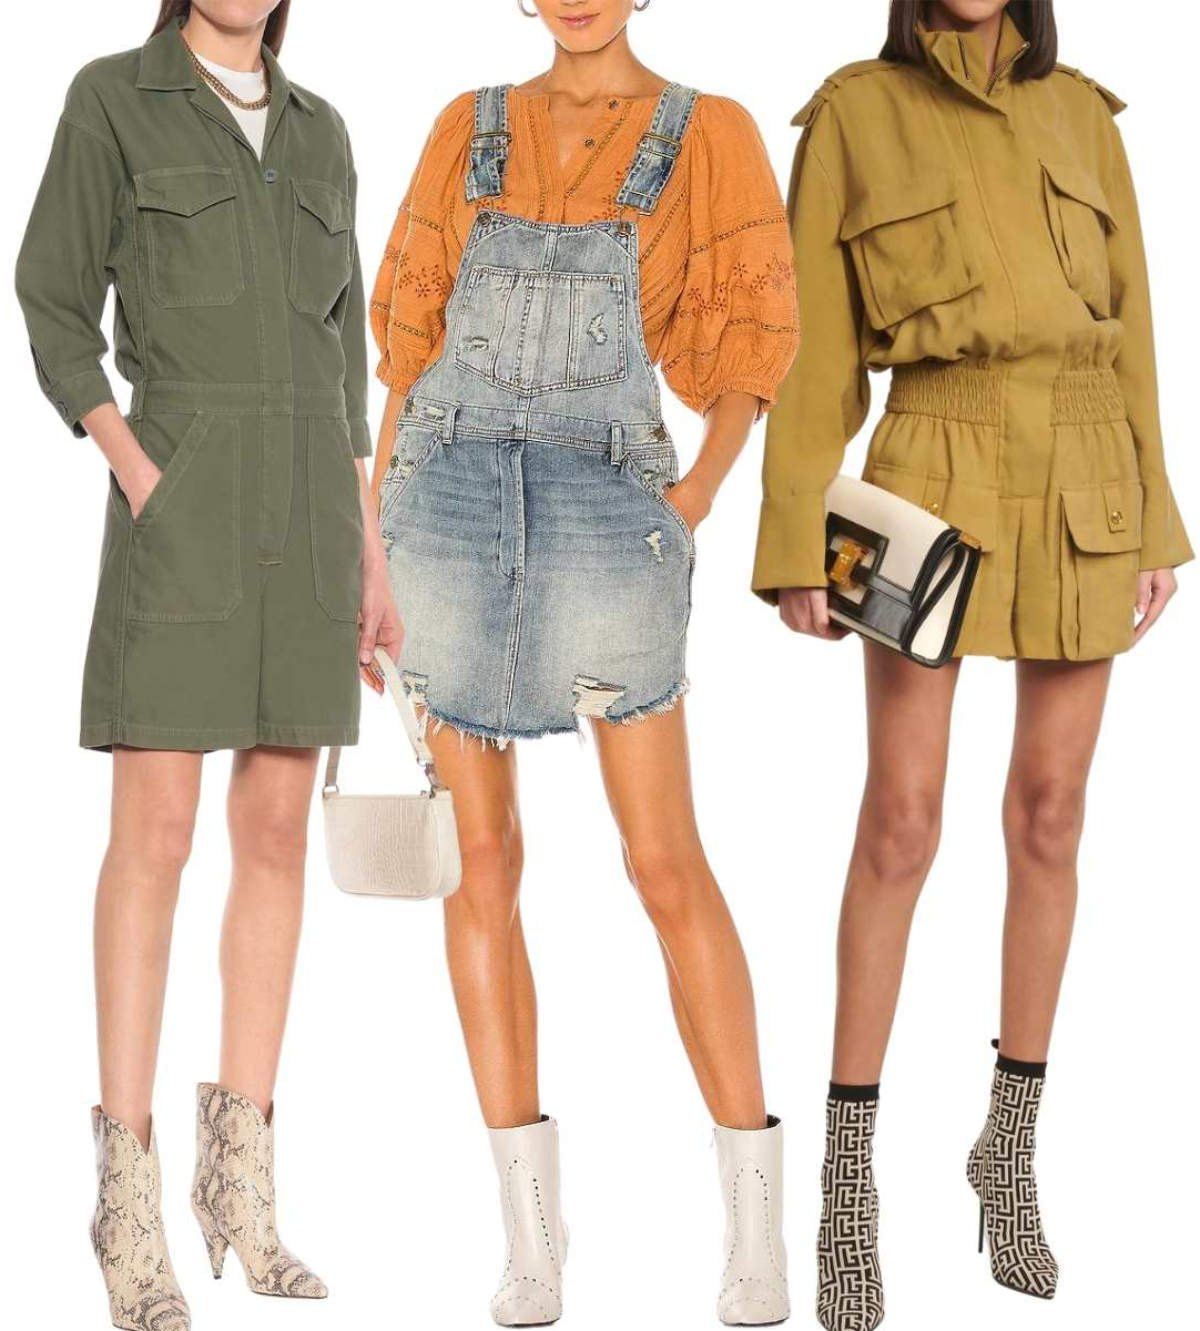 Collage of 3 women wearing ankle boots with romper outfits.